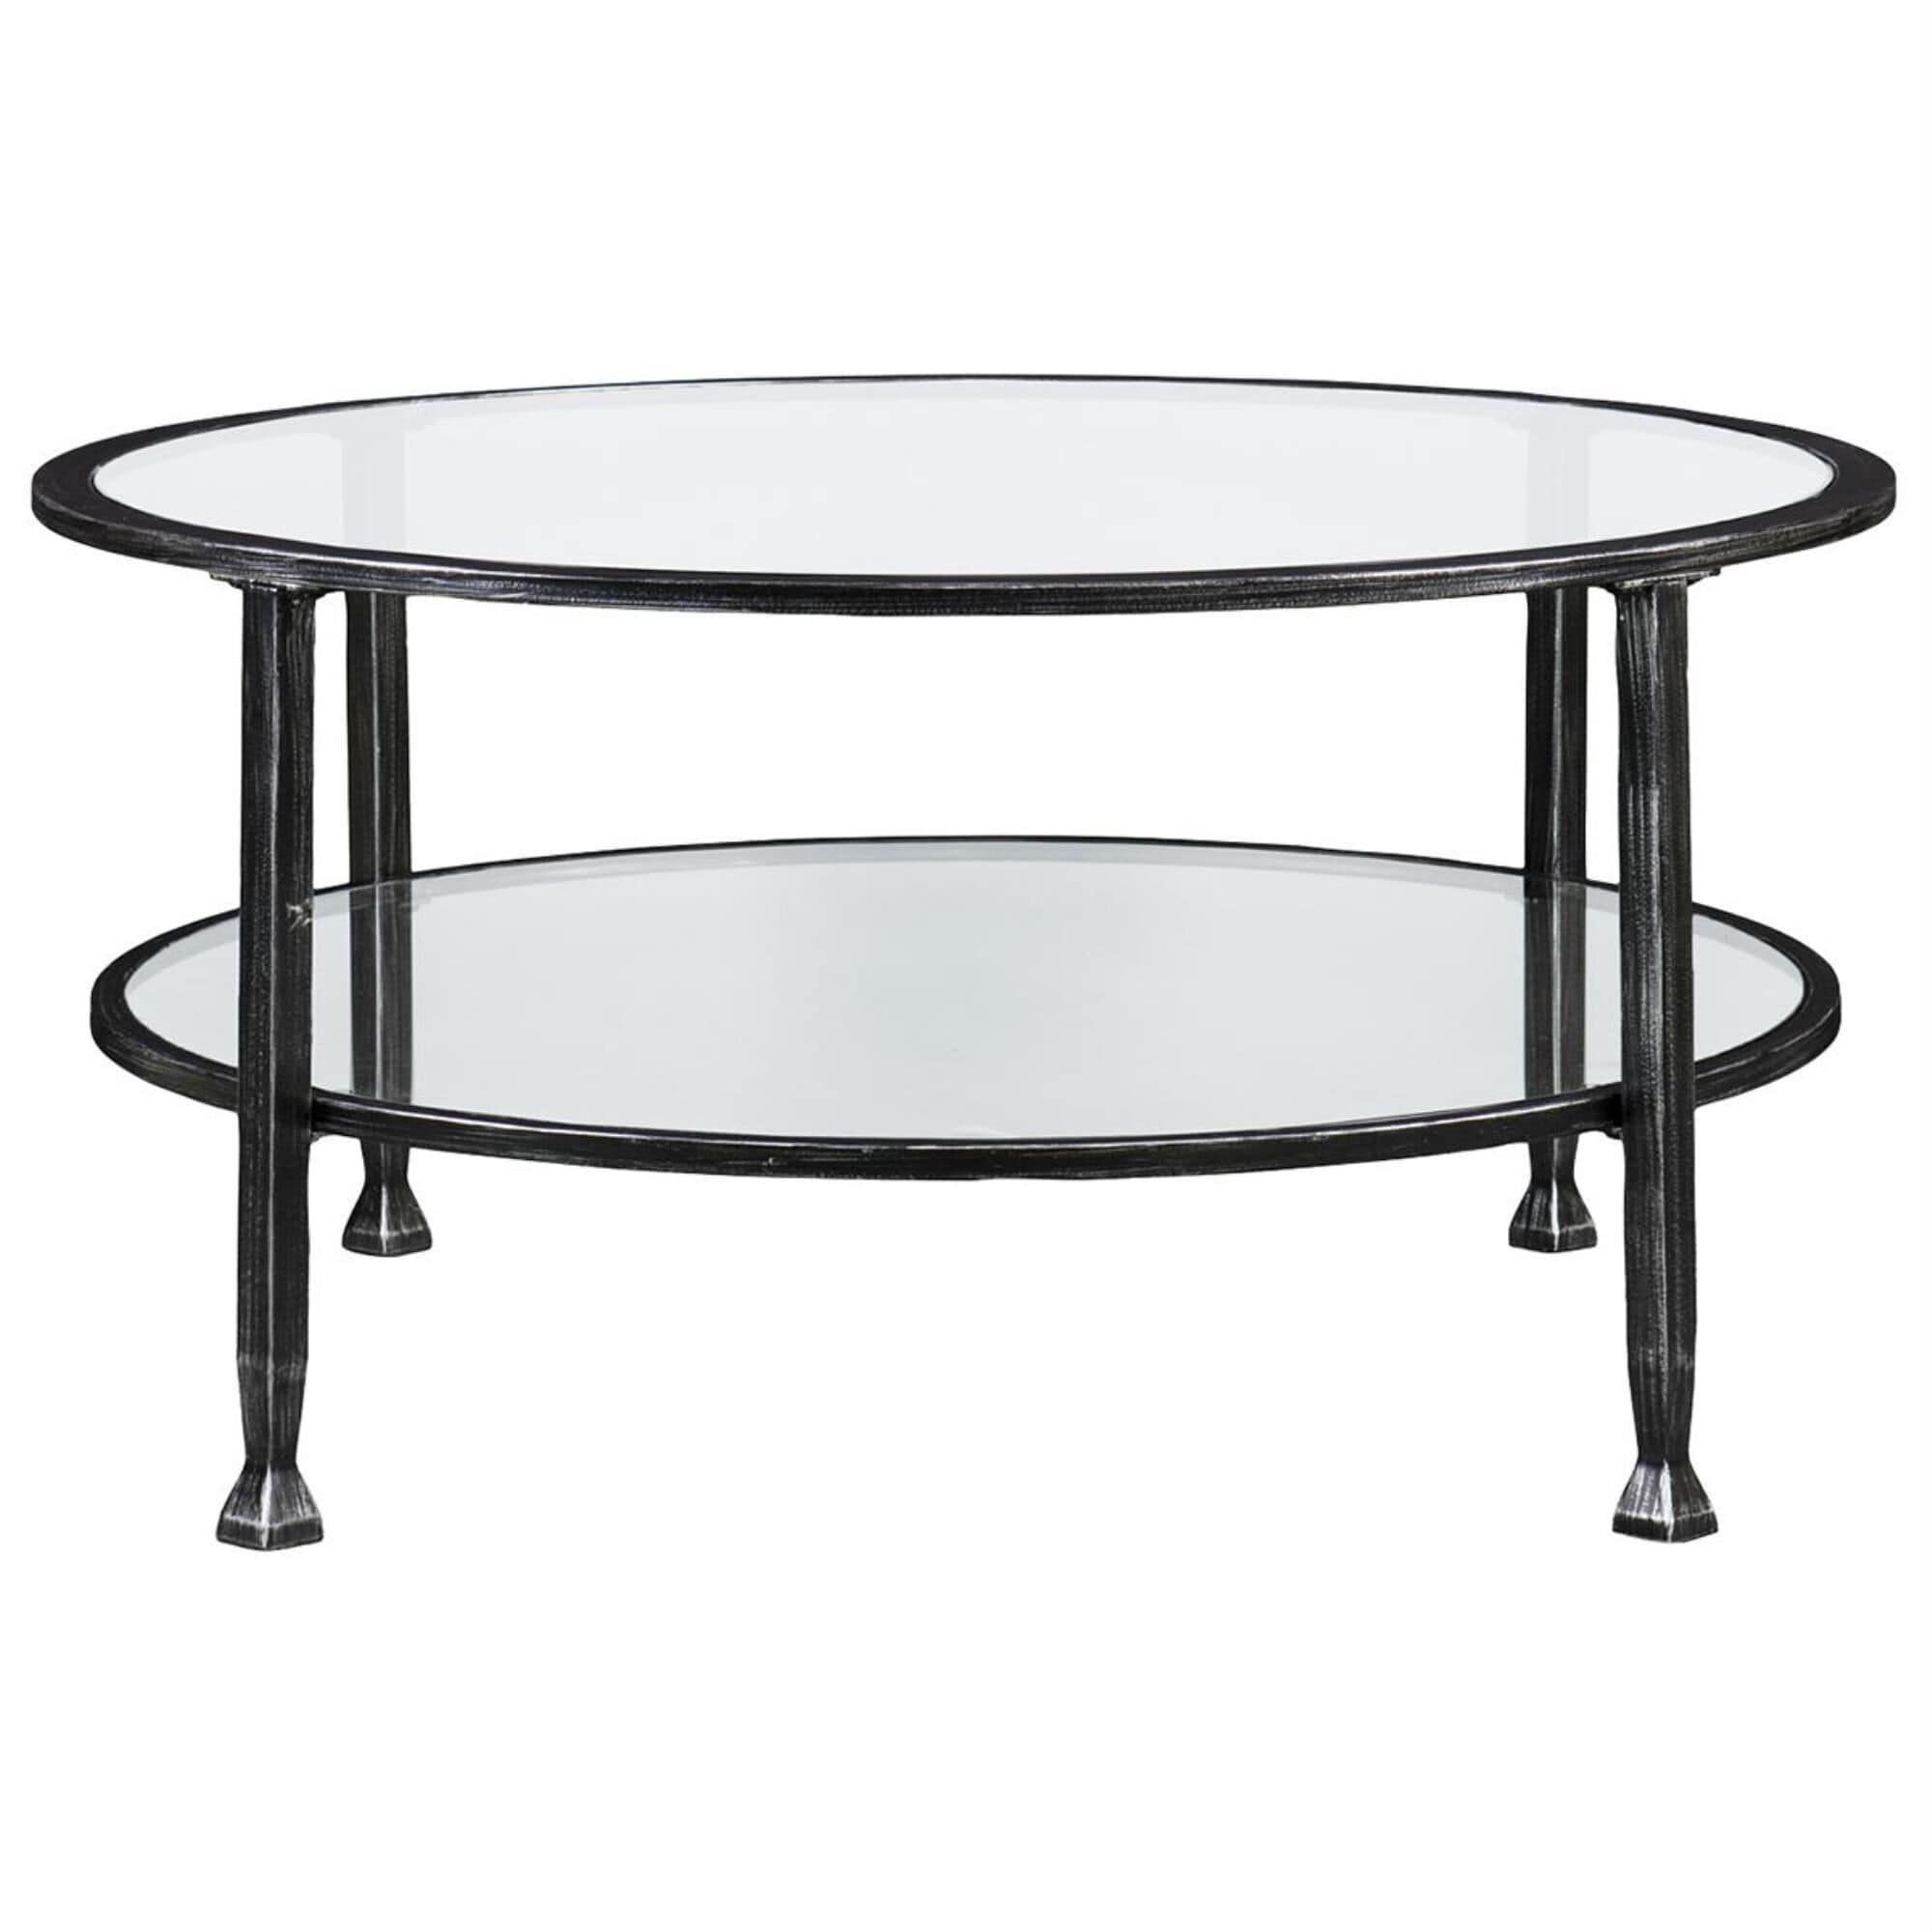 Southern Enterprises Jaymes Round Coffee Table In Distressed Black And Regarding Southern Enterprises Larksmill Coffee Tables (View 9 of 20)